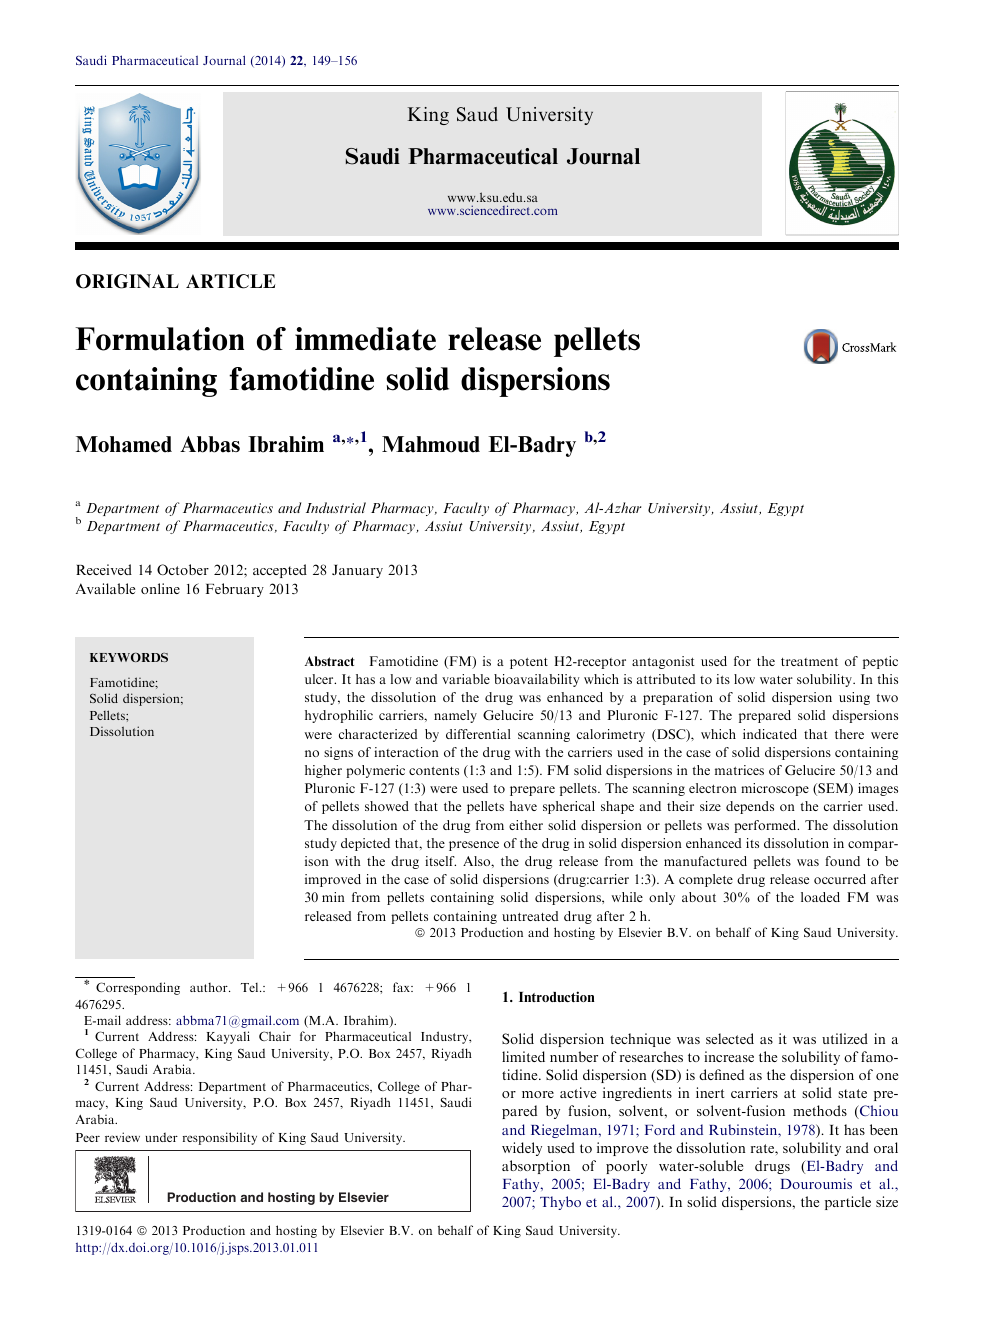 Formulation Of Immediate Release Pellets Containing Famotidine Solid Dispersions Topic Of Research Paper In Chemical Sciences Download Scholarly Article Pdf And Read For Free On Cyberleninka Open Science Hub